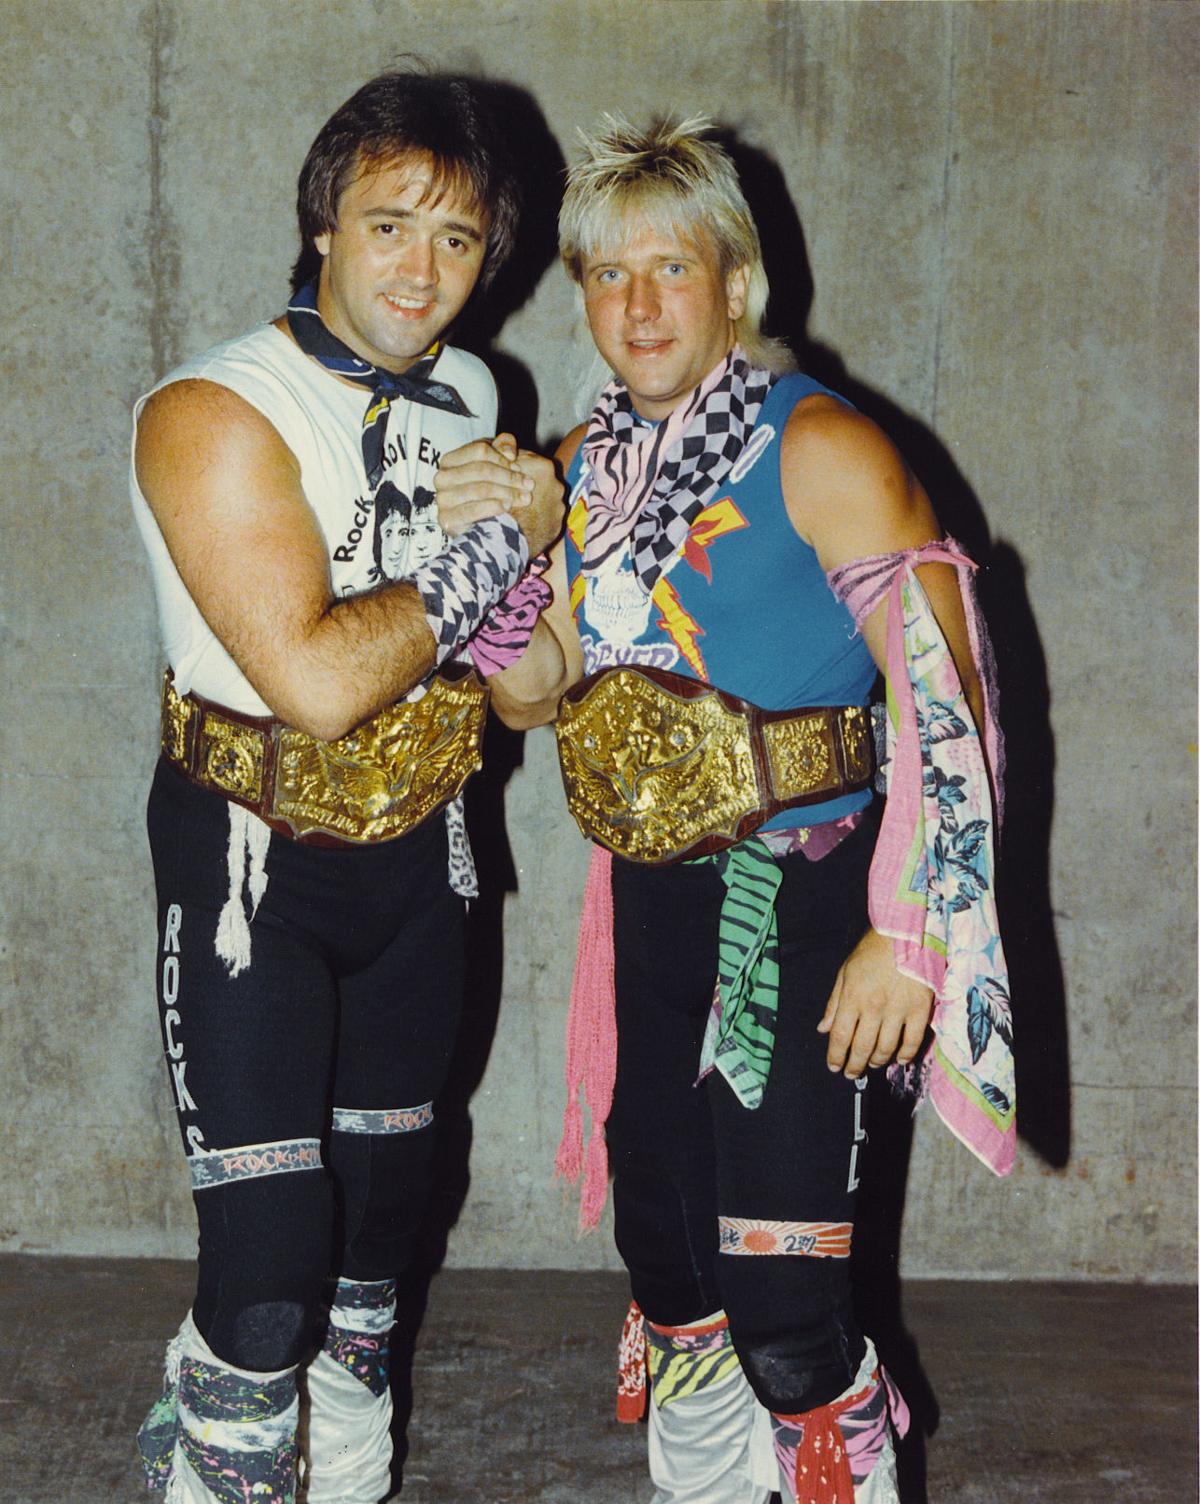 Wrestling's Rock 'n' Roll Express tag team is here to stay | Wrestling |  